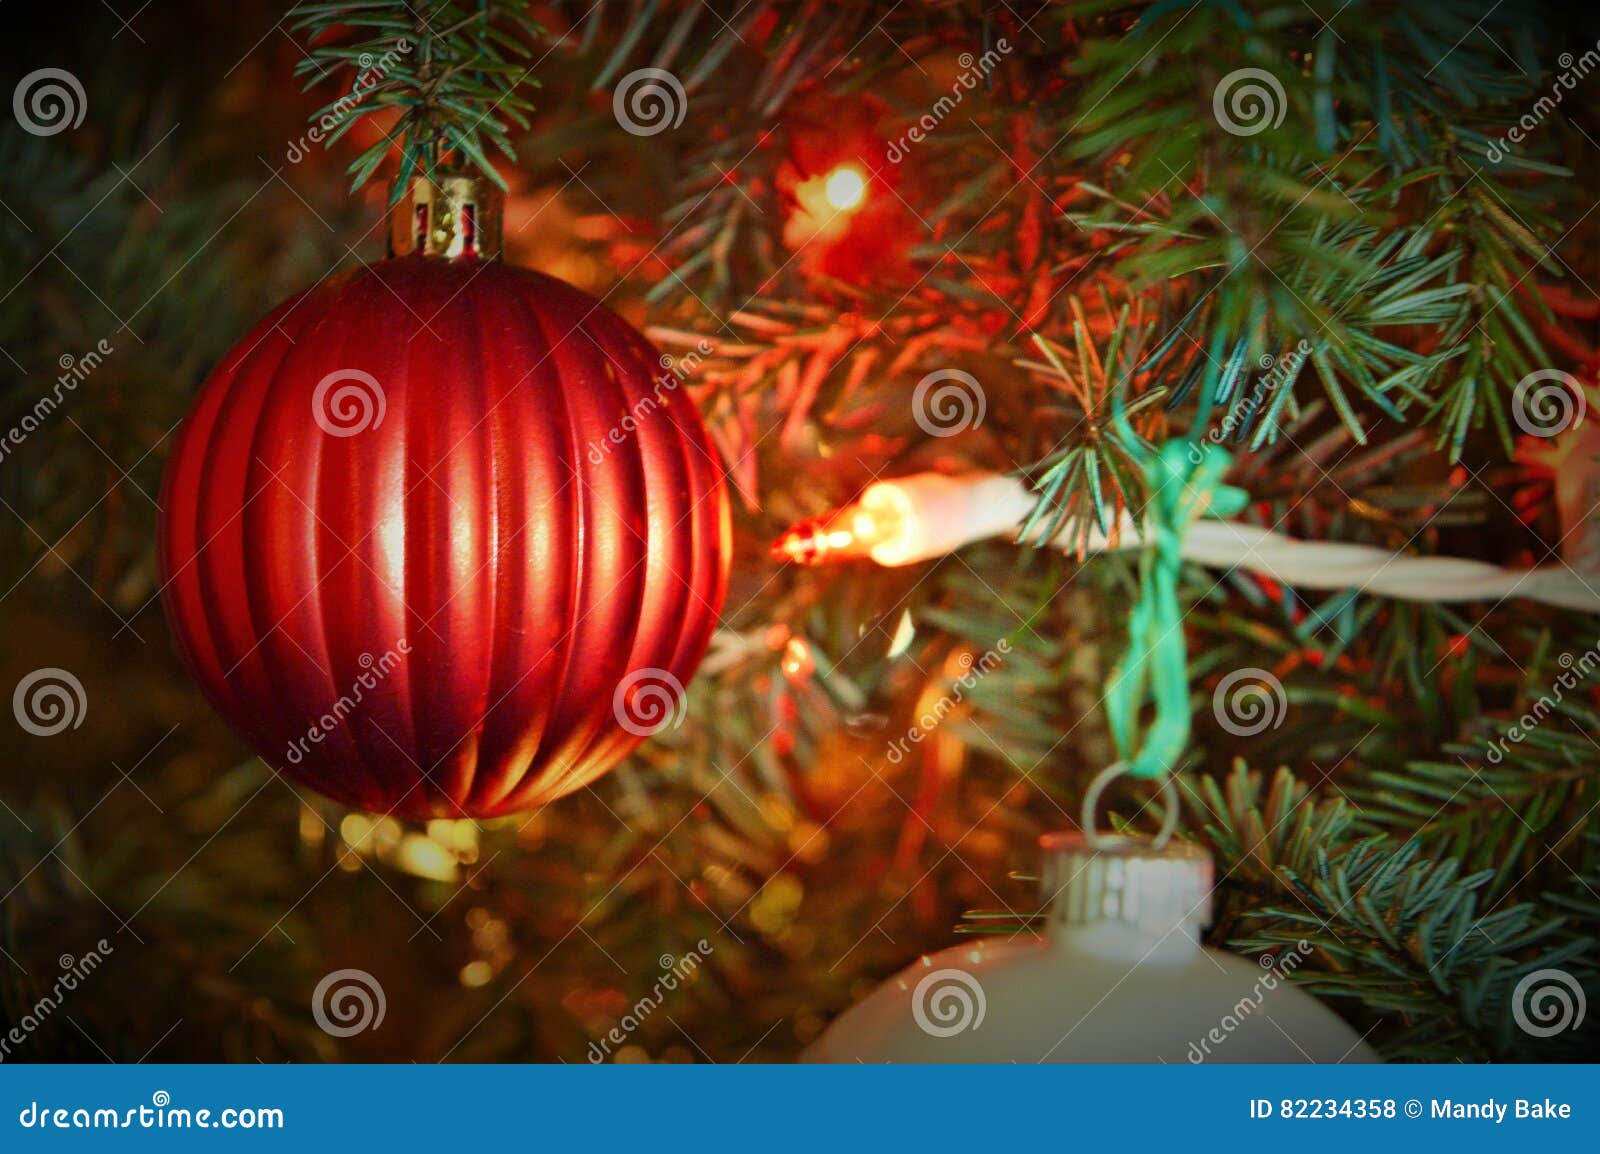 Hanging Ornaments from the Christmas Tree Stock Photo - Image of ...